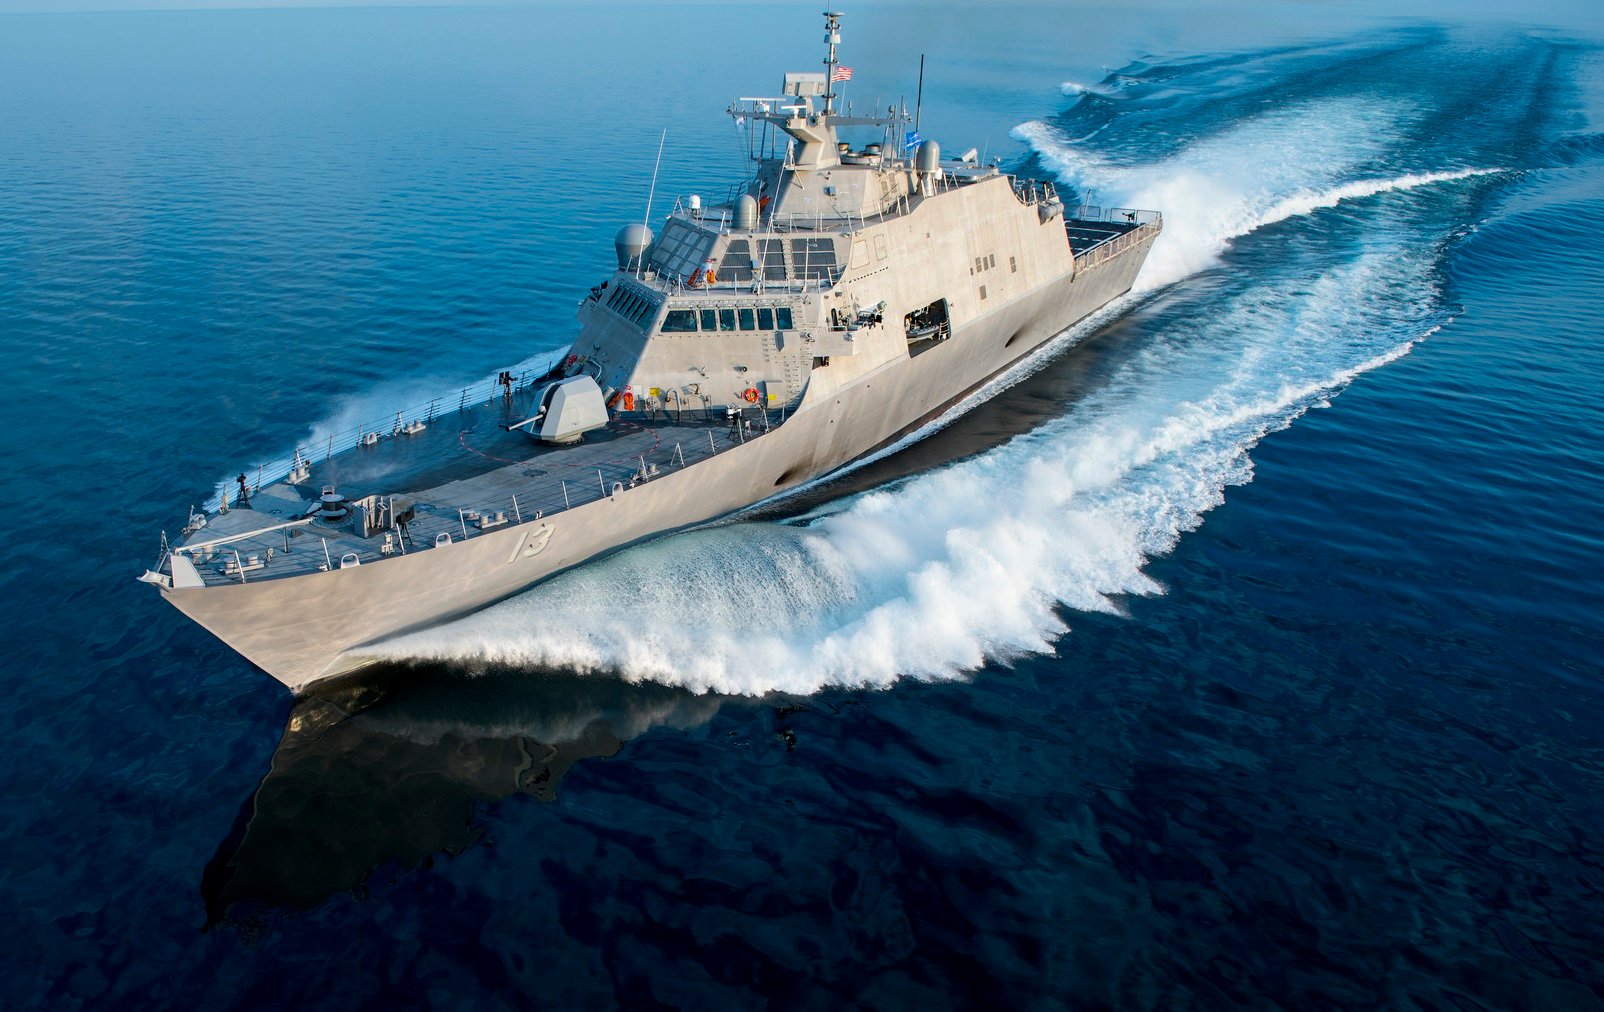 U.S. Navy received two new Littoral Combat Ships